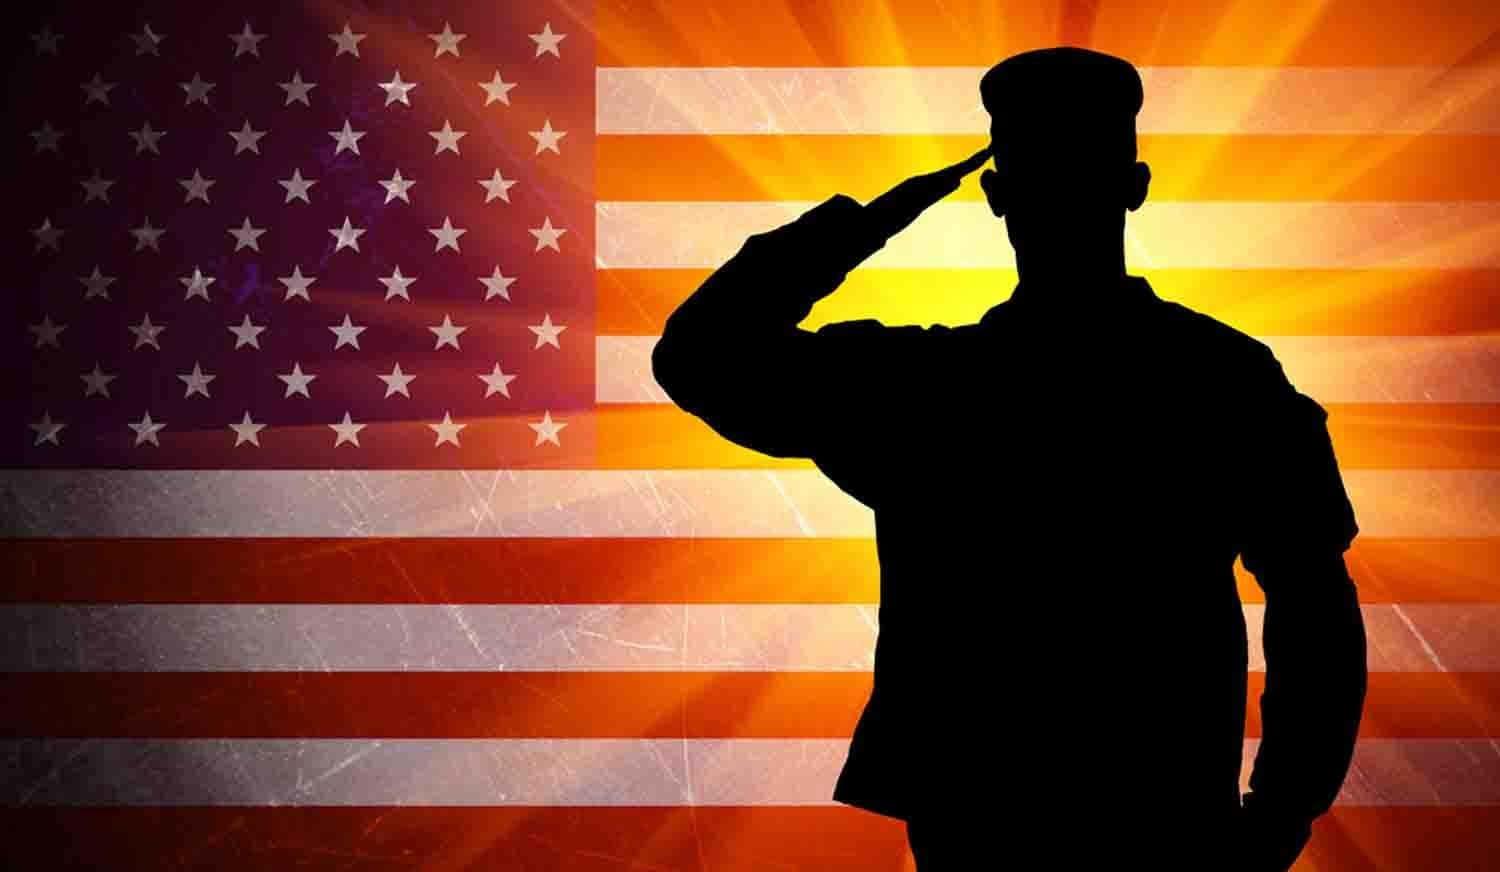 Download A Silhouette Of A Soldier Saluting In Front Of An